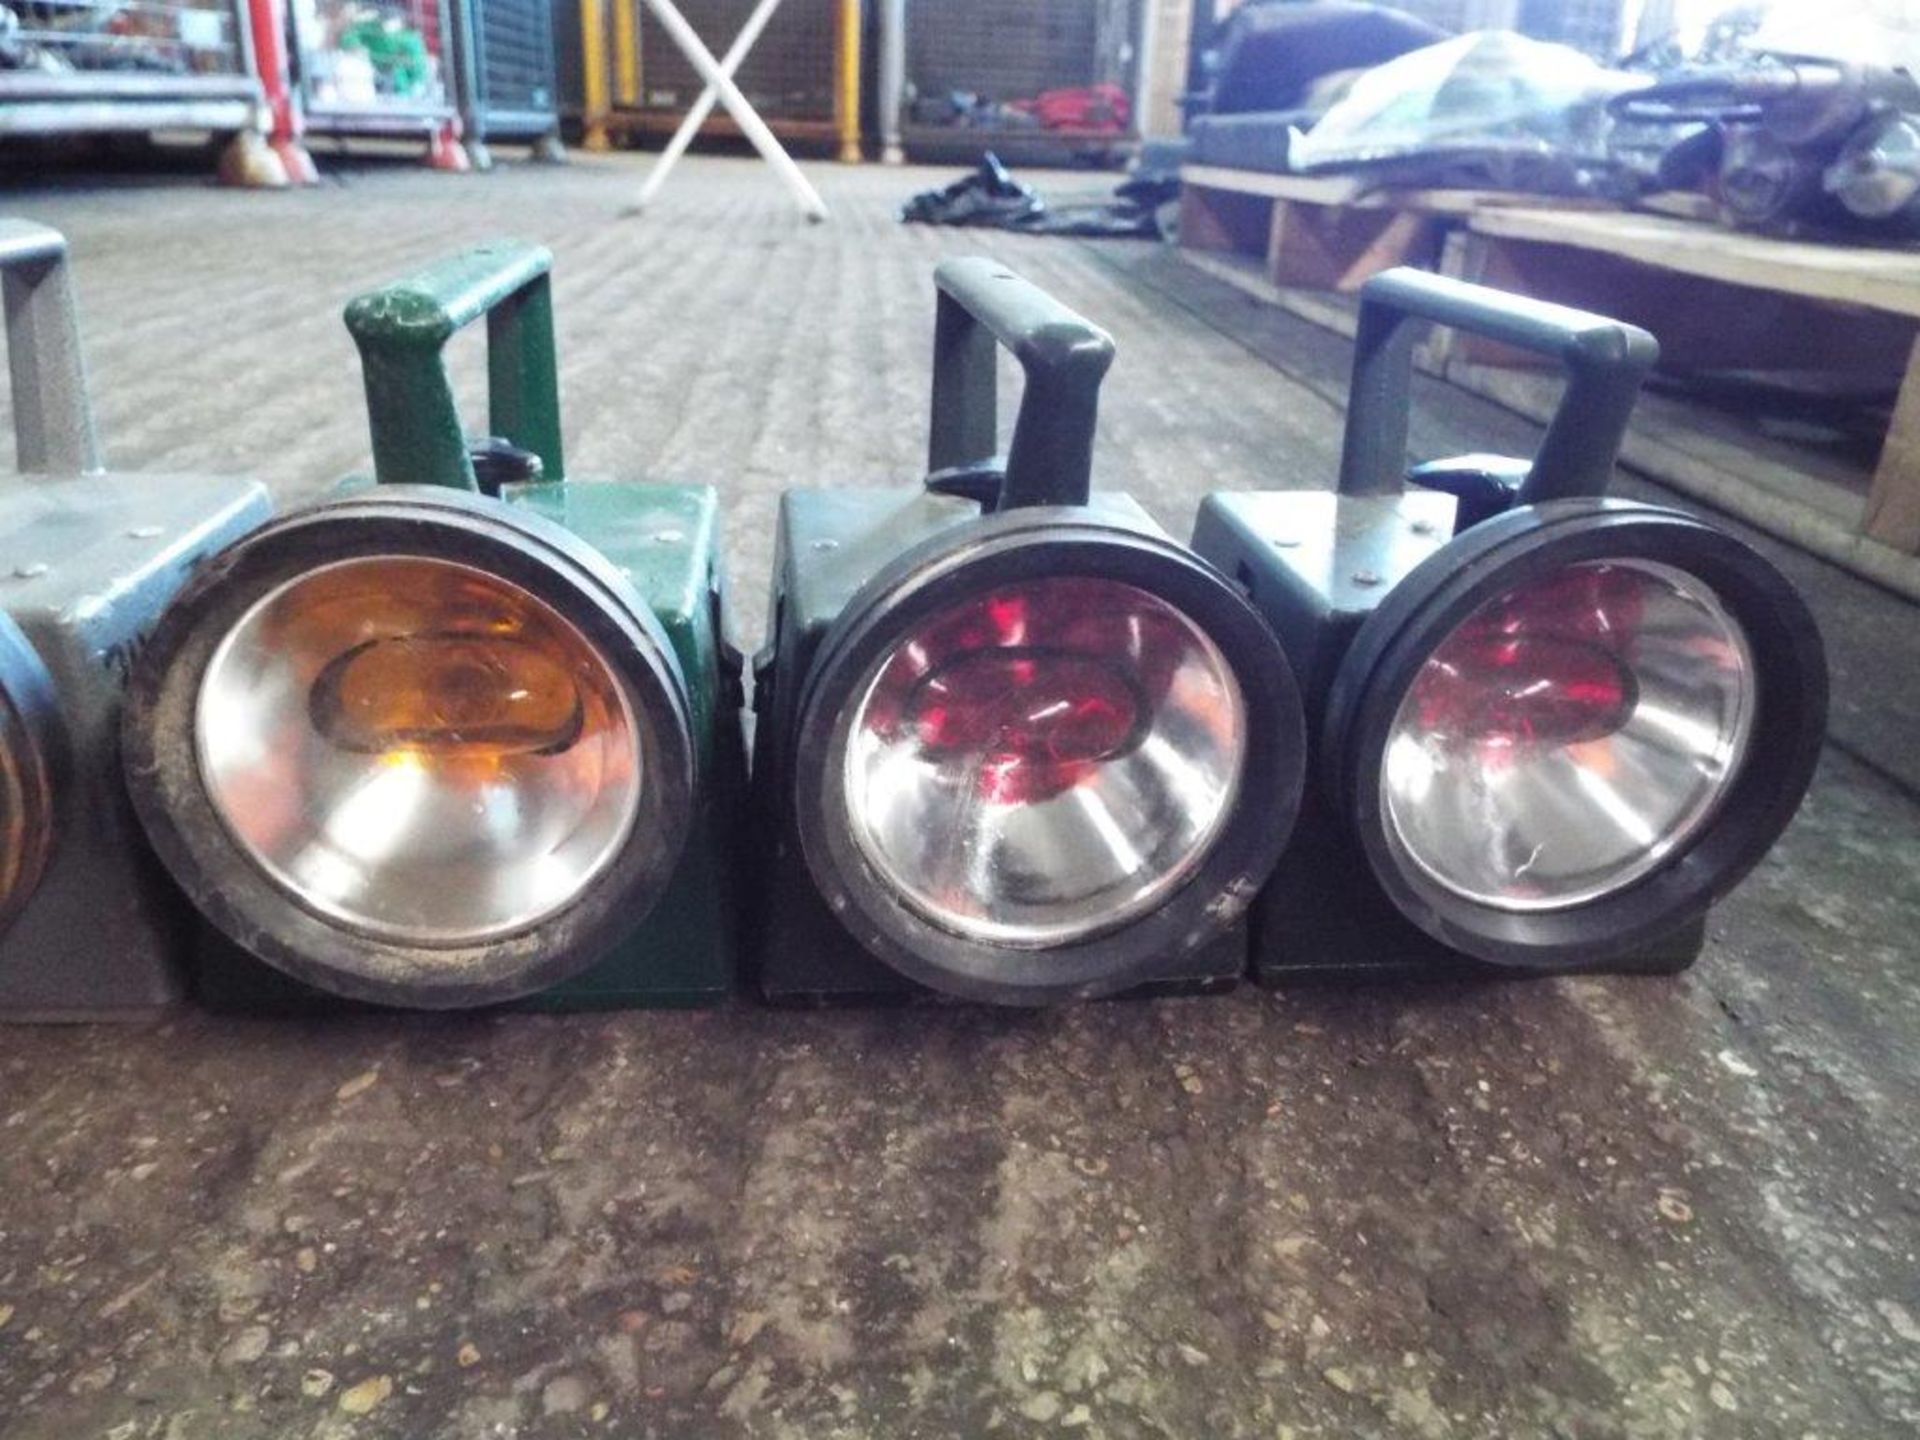 6 x Signal Lamps with 4 aspects Red, Amber, Green and Clear - Image 3 of 7